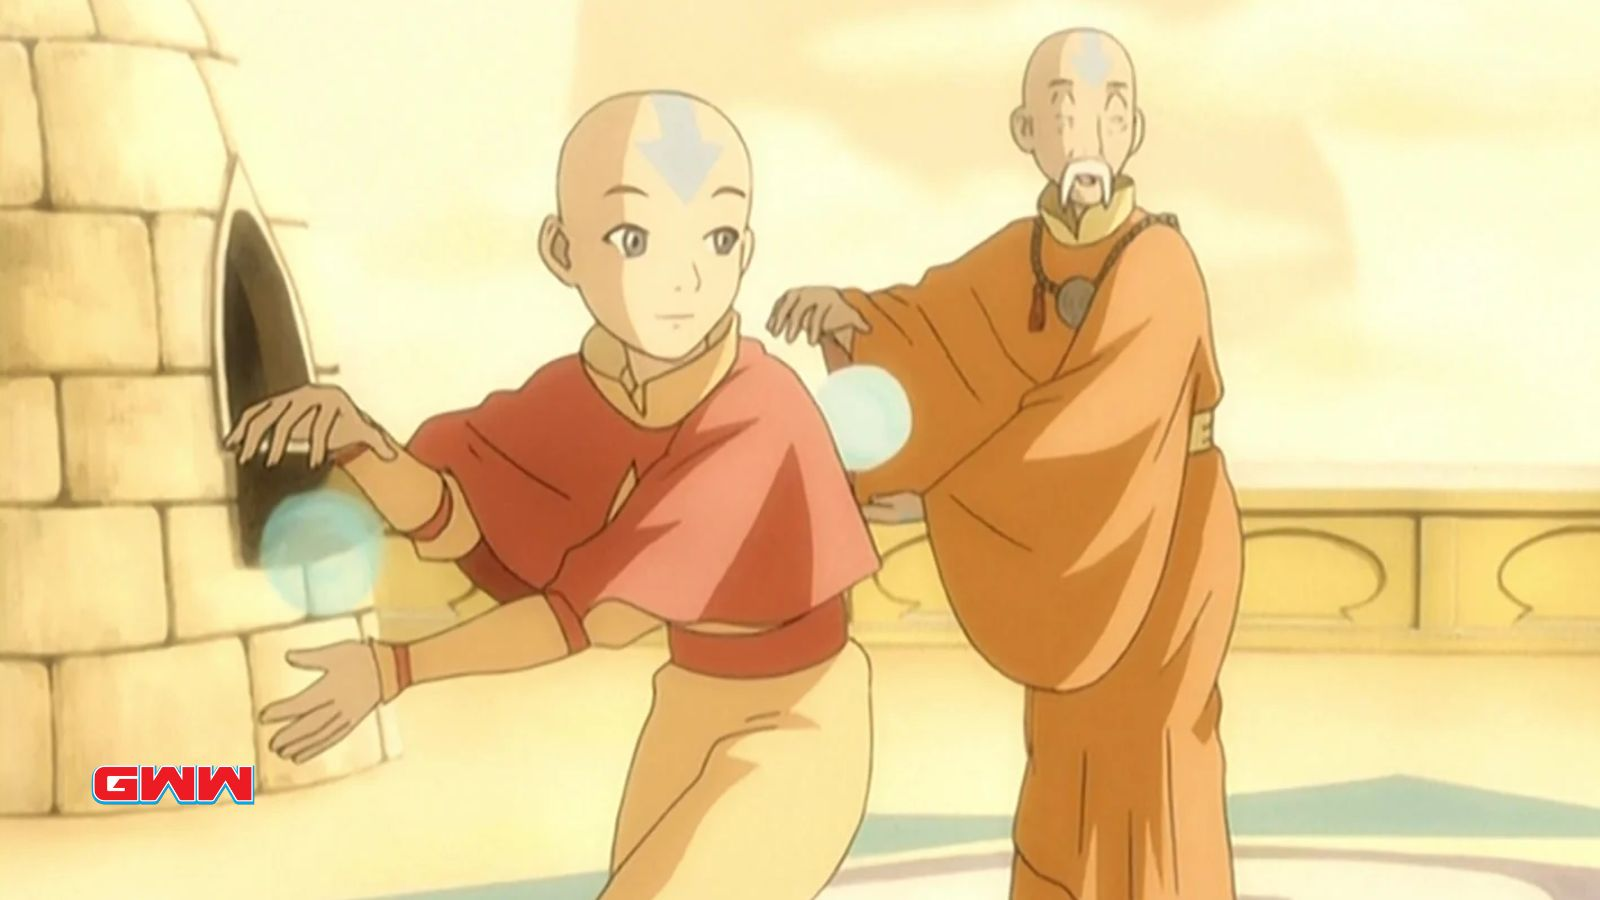 Aang's guardian, mentor, and father figure, Monk Gyatso, is Avatar an anime